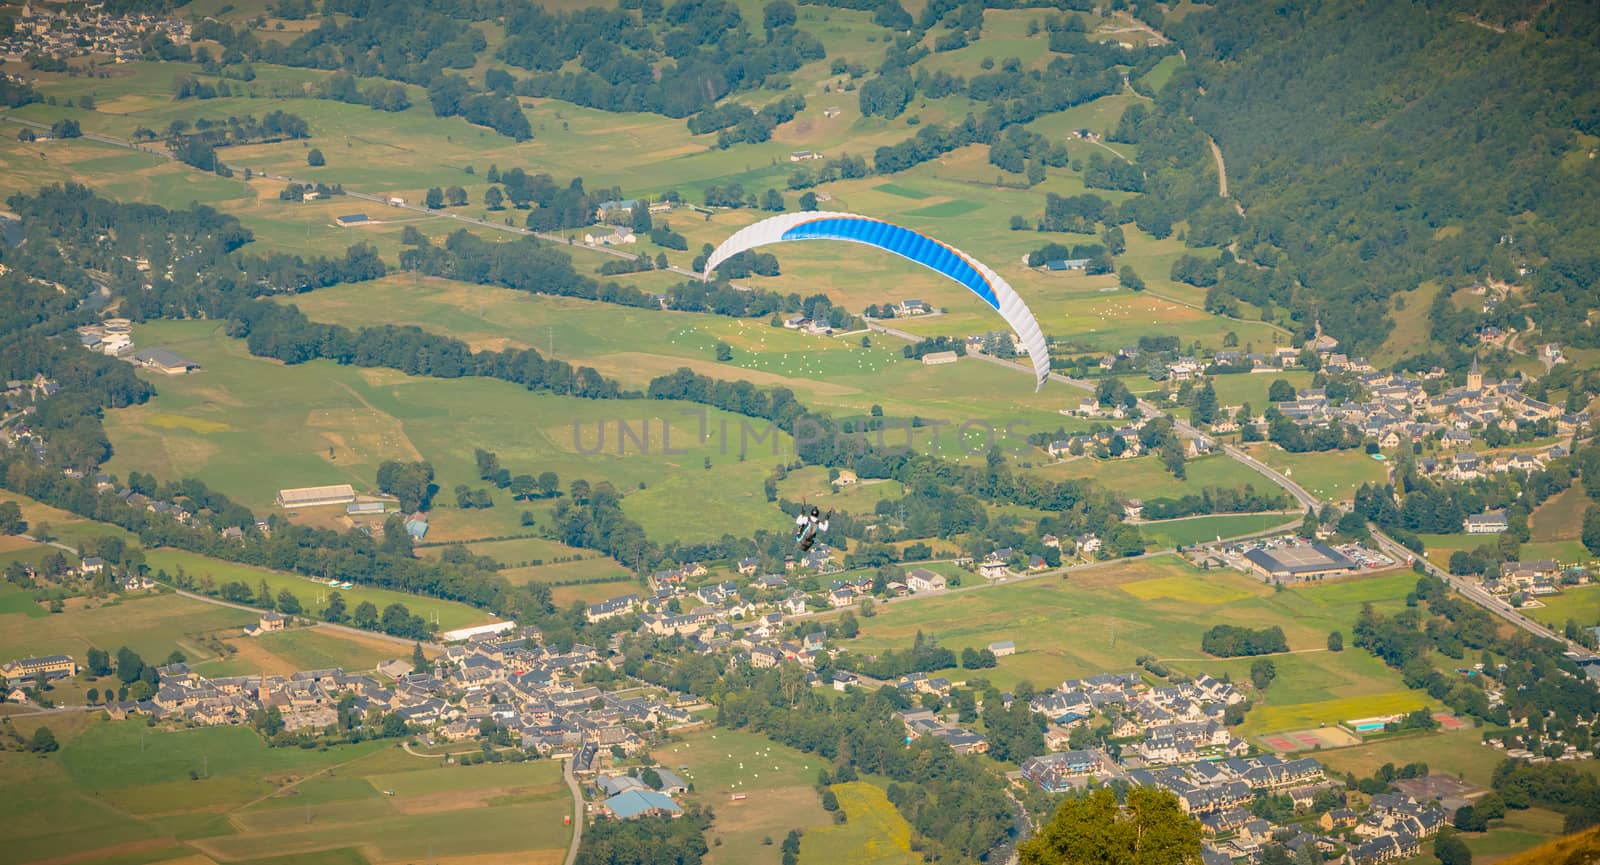 Saint Lary Soulan, France - August 20, 2018: paragliding in flight at the top of the mountain at 1700 meters above sea level flying over the valley on a summer day